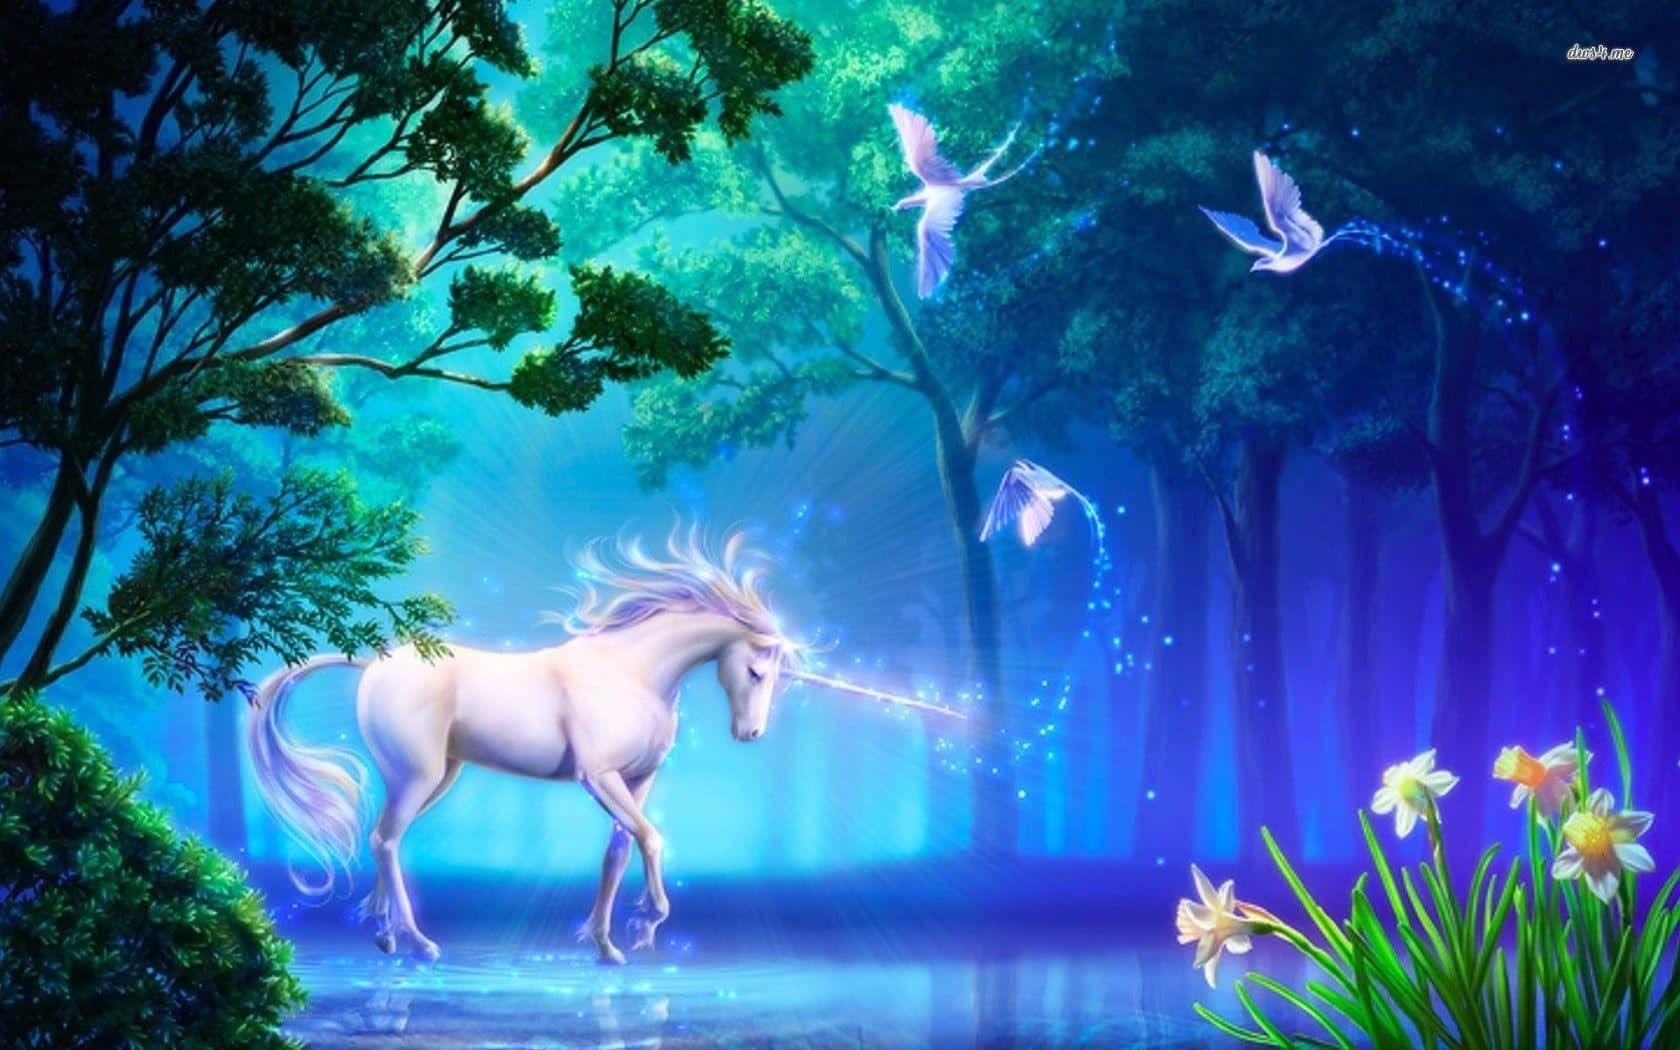 Take a trip to the mythical land of unicorns with this majestic desktop background Wallpaper